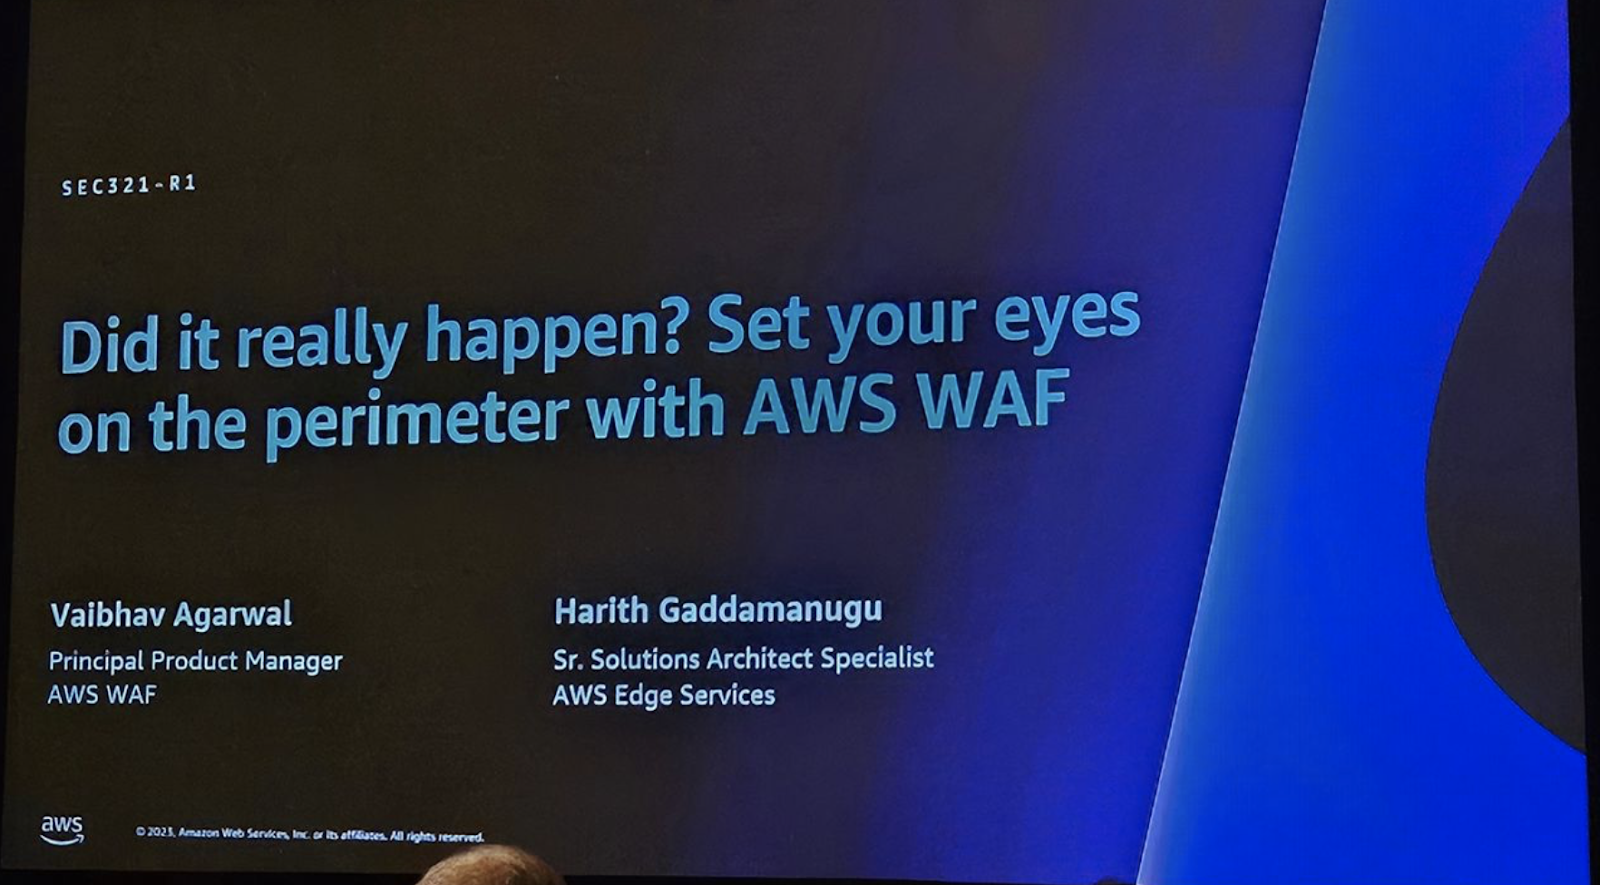 Did it really happen? Set your eyes on the perimeter with AWS WAF